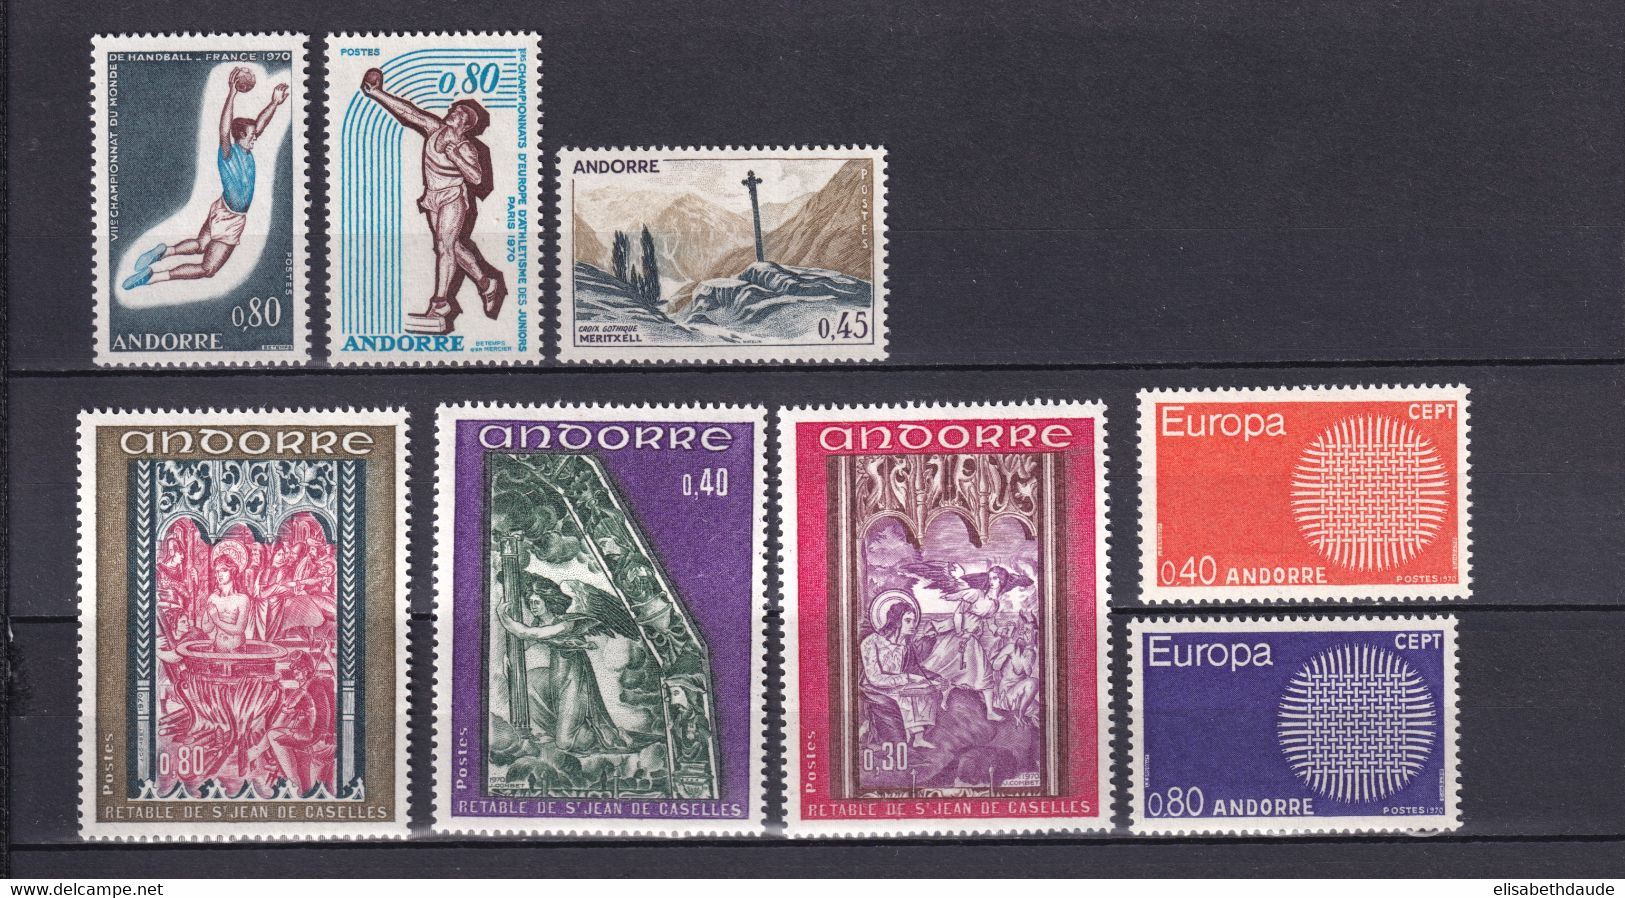 ANDORRE - ANNEE COMPLETE 1970 YVERT N° 201/208 ** MNH - COTE = 47.5 EUR. - - Annate Complete